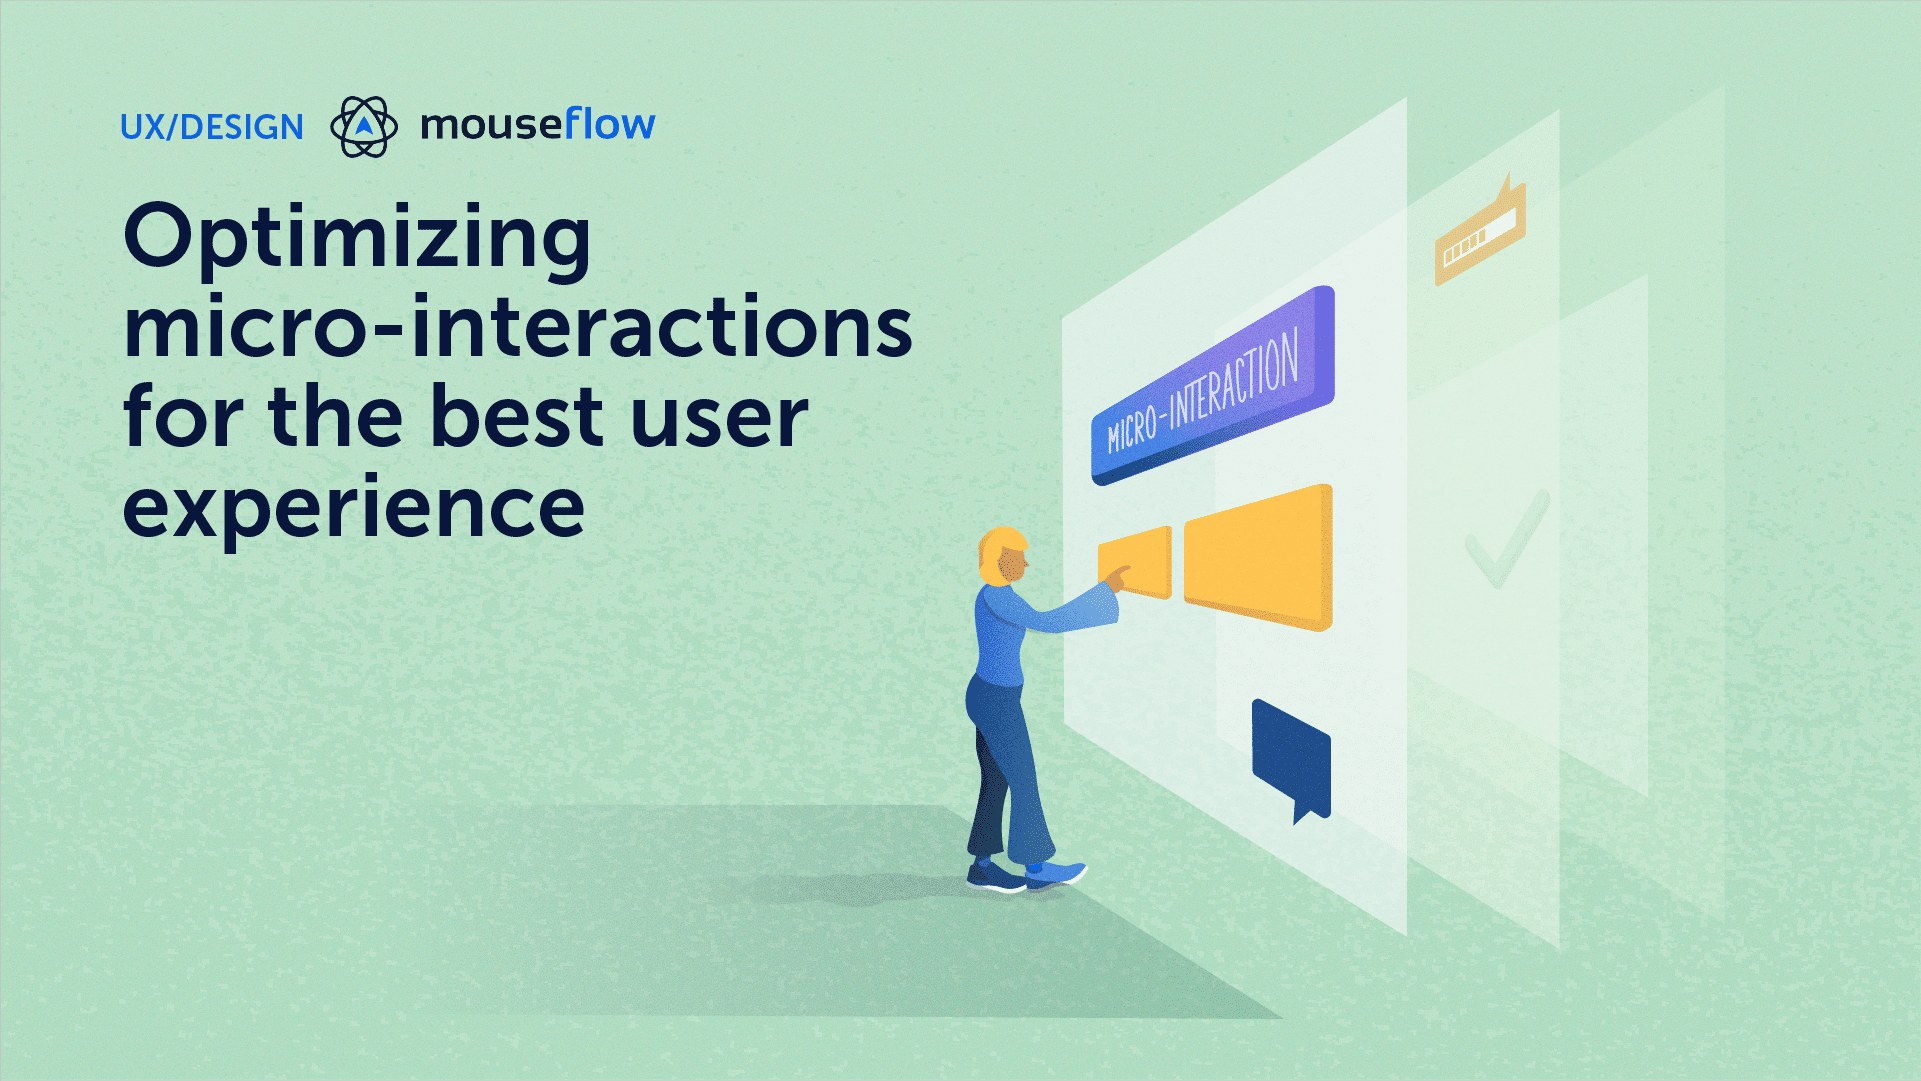 Header image for Mouseflow's blopost on how to analyze and optimize micro-interactions on websites with user testing and behavior analytics.